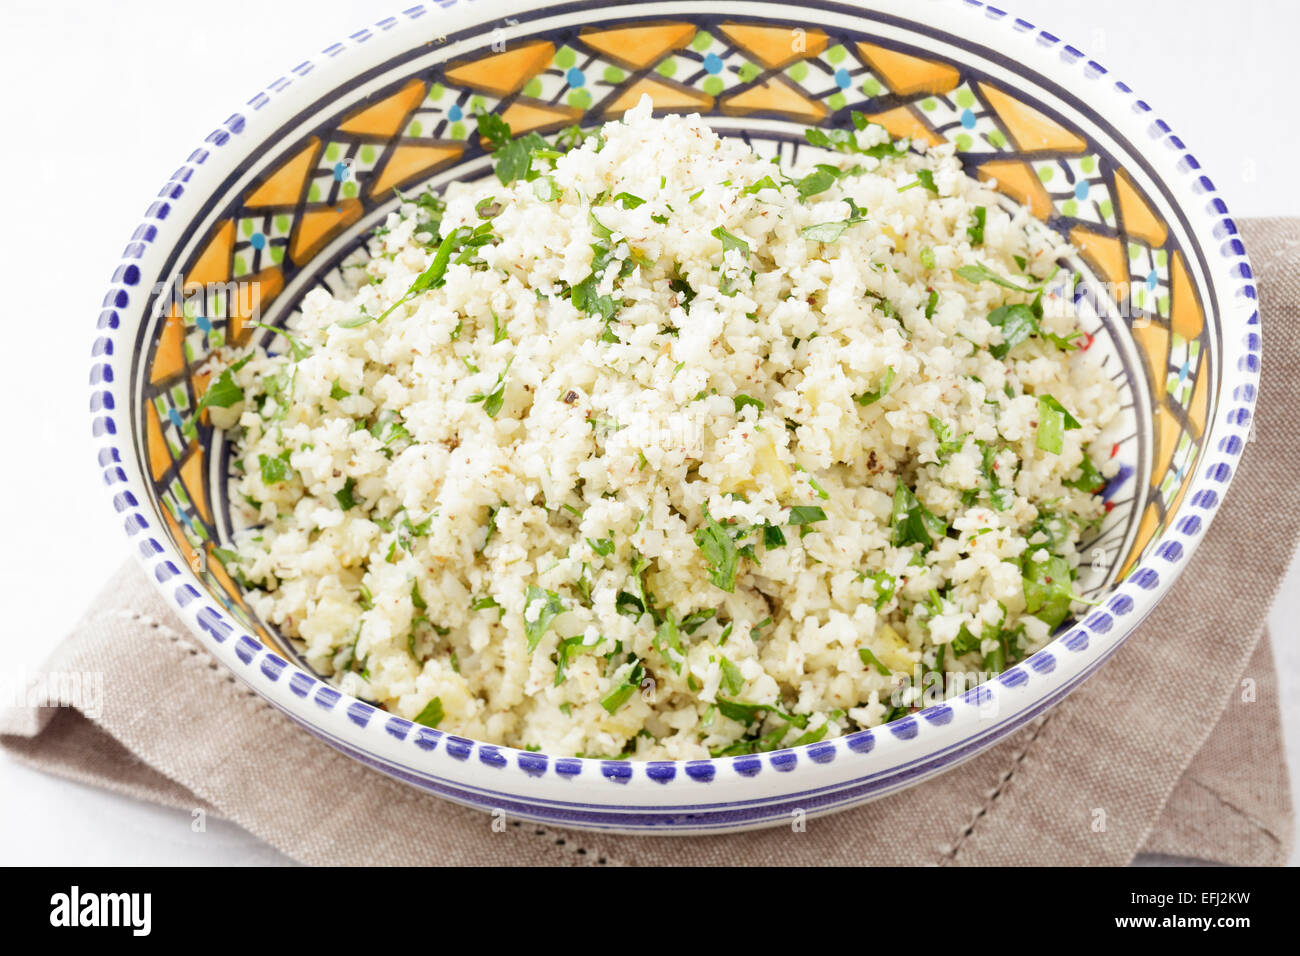 cauliflower prepared as couscous  with chopped parsley, za'atar,  and preserved lemons Stock Photo